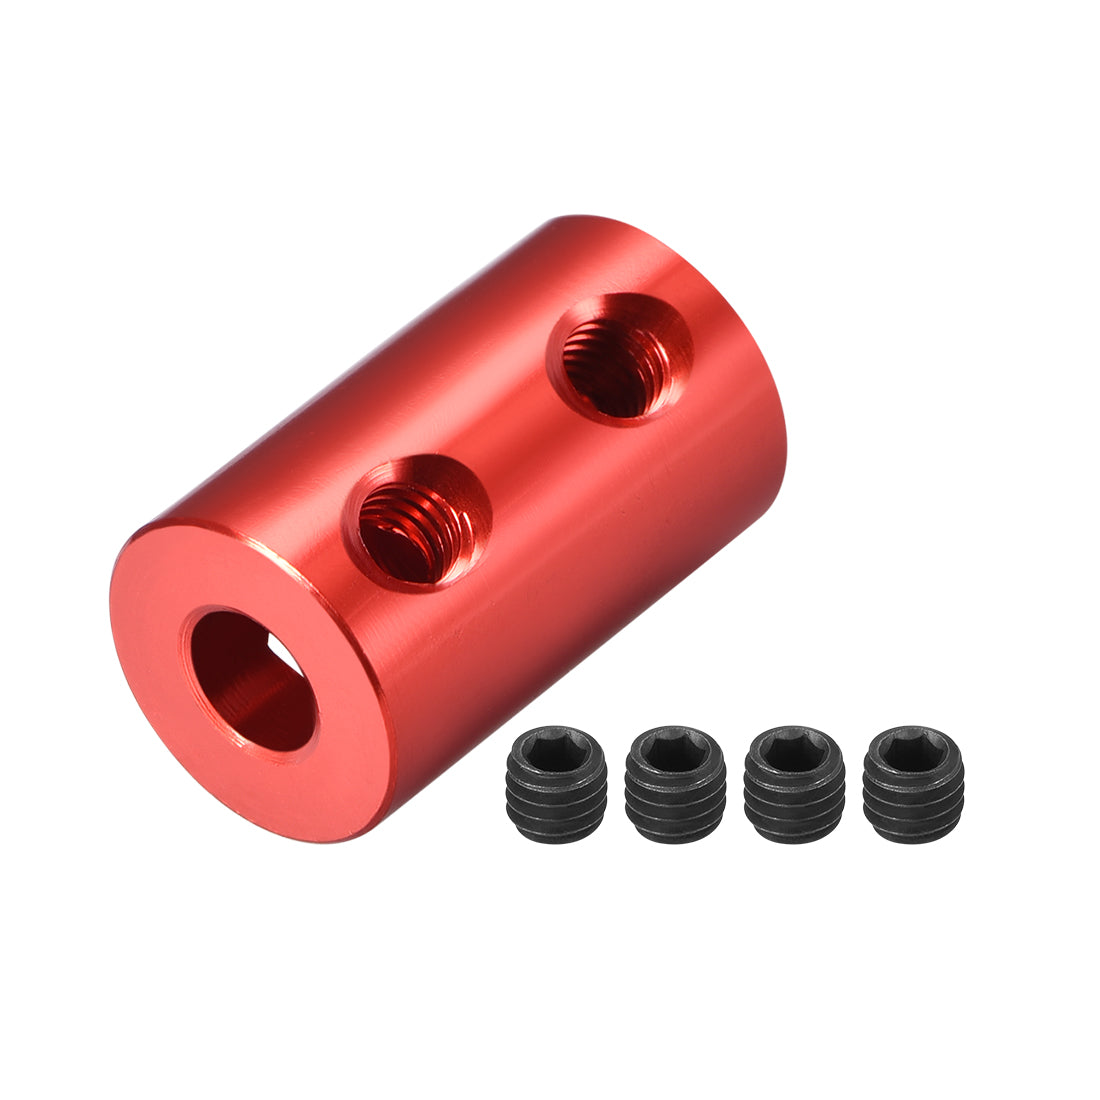 uxcell Uxcell Shaft Coupling 4mm to 5mm Bore L20xD12 Robot Motor Wheel Rigid Coupler Connector Red